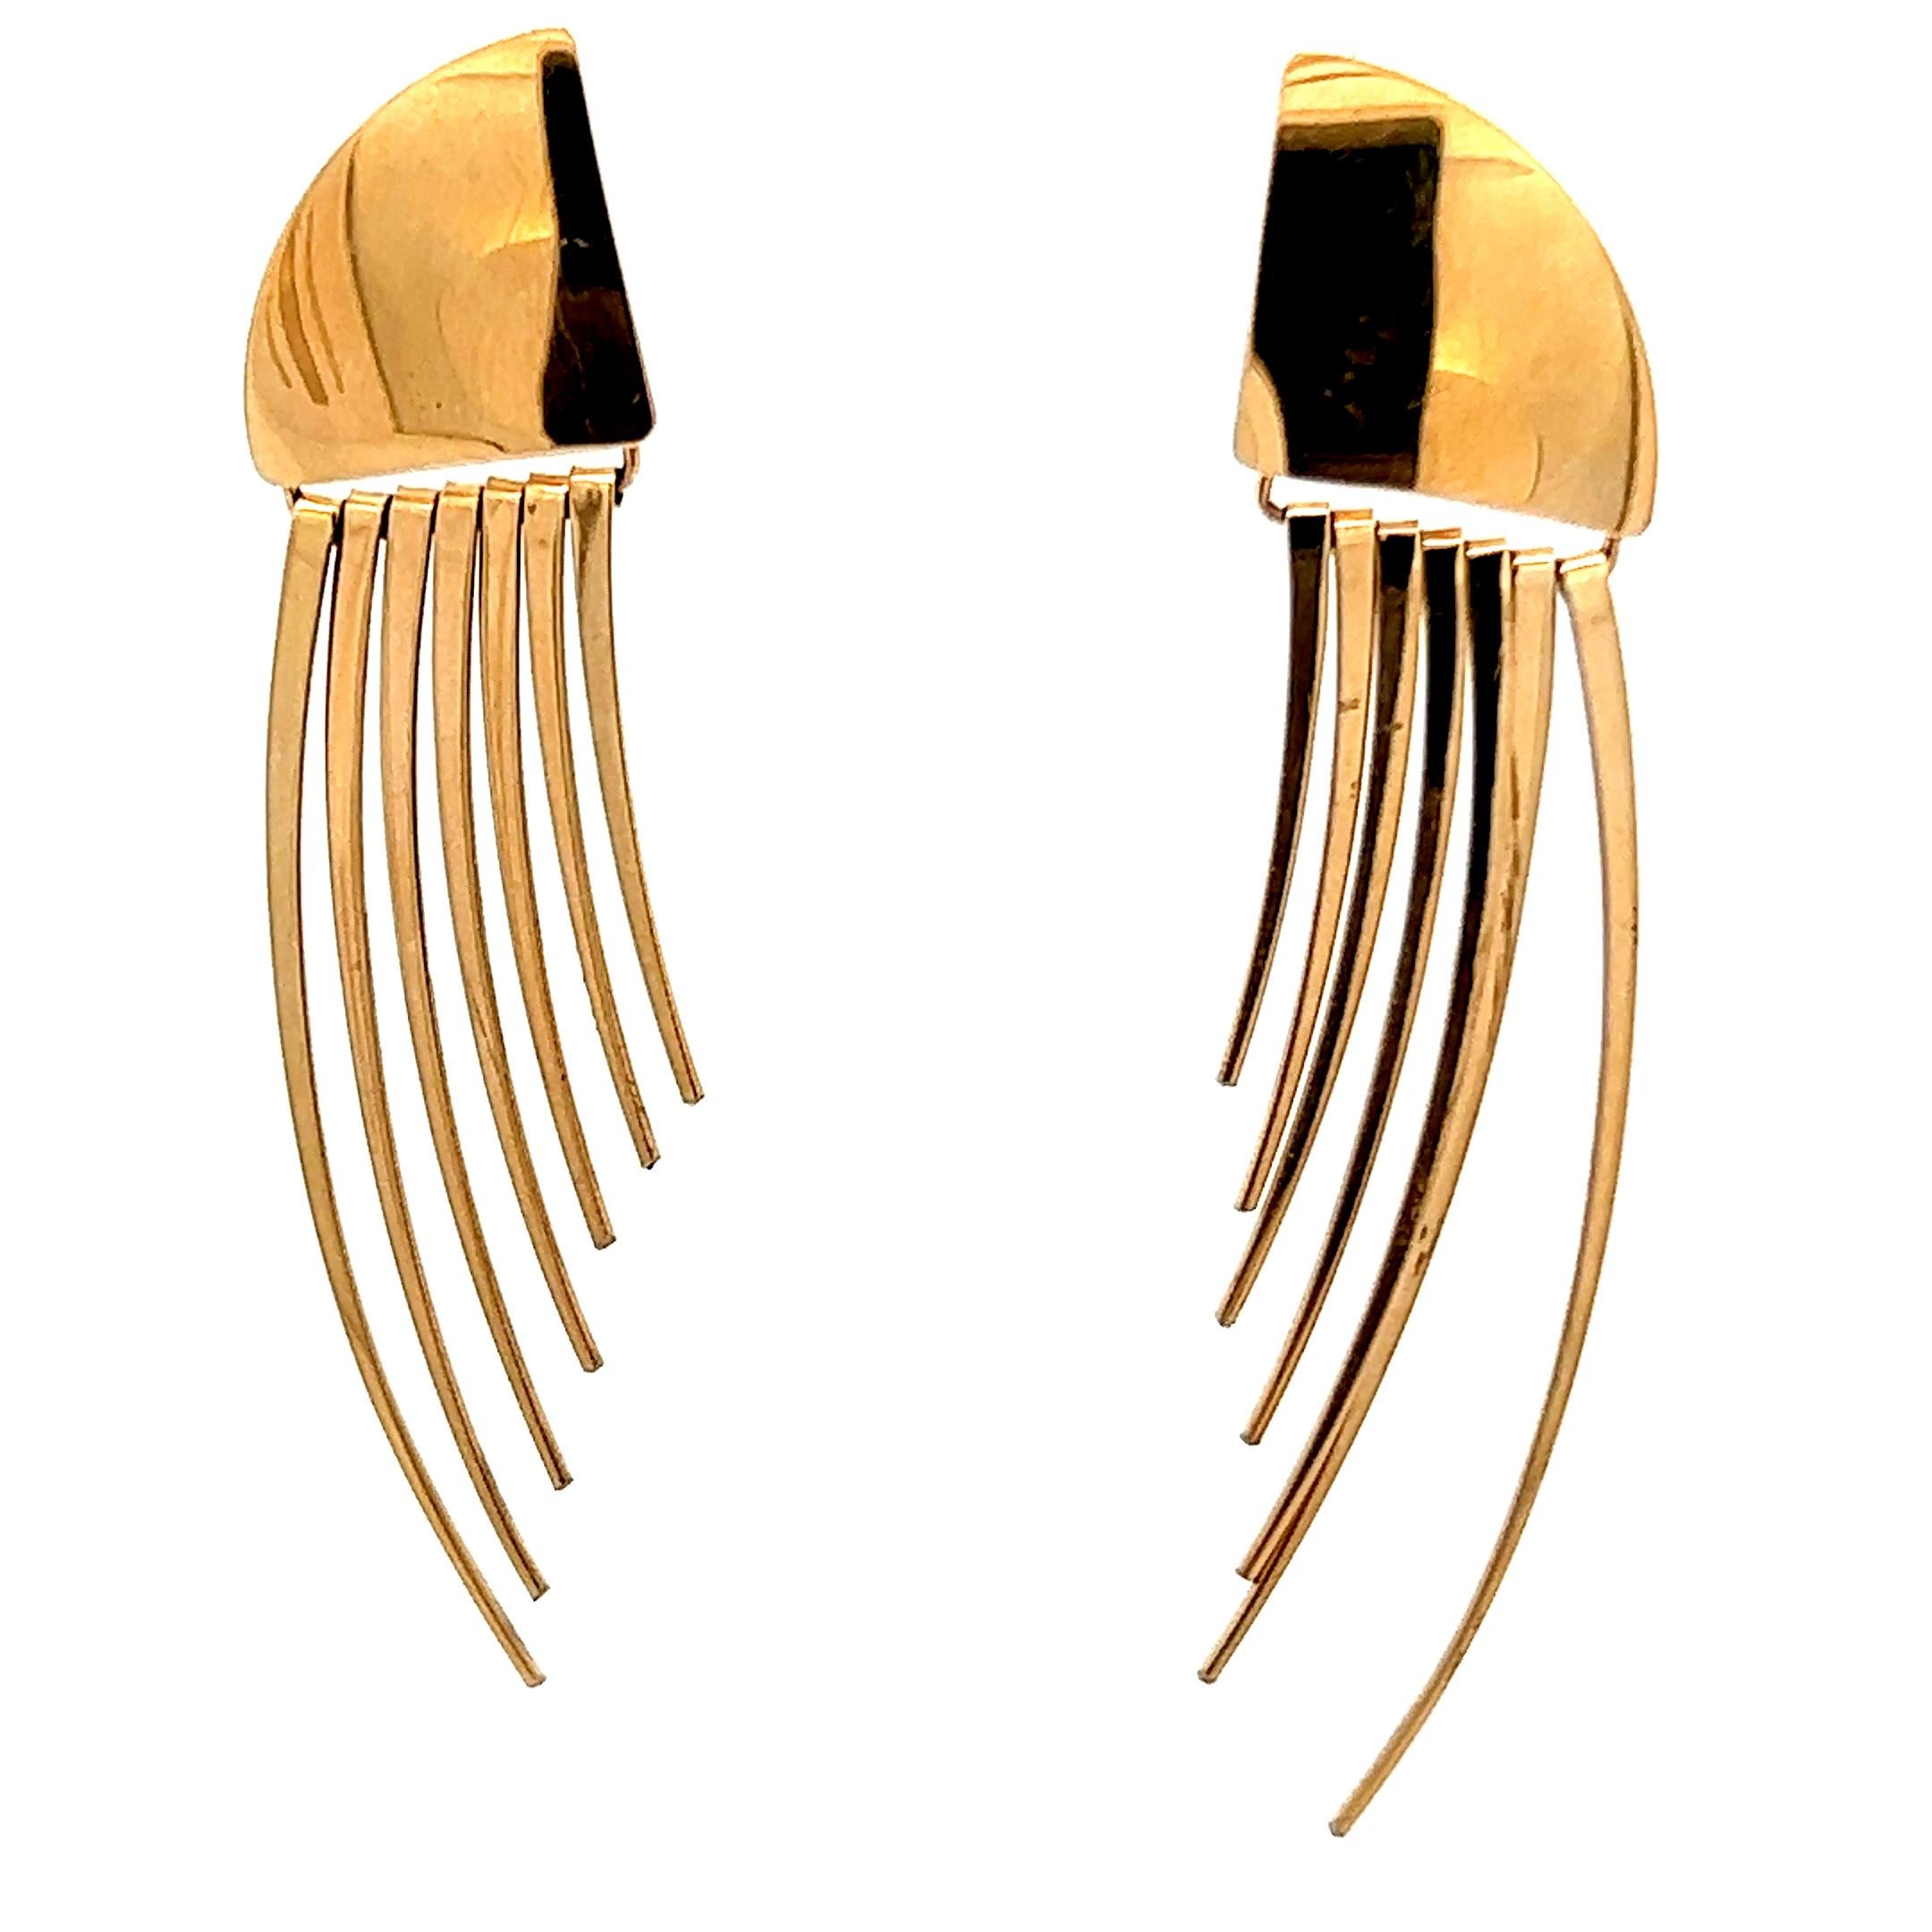 This beautiful pair of 14k yellow gold statement earrings are gorgeous. The earrings feature a dangle design that allows the earrings to be worn in either directions, allowing them to be worn in multiple ways while still delivering a fresh look.